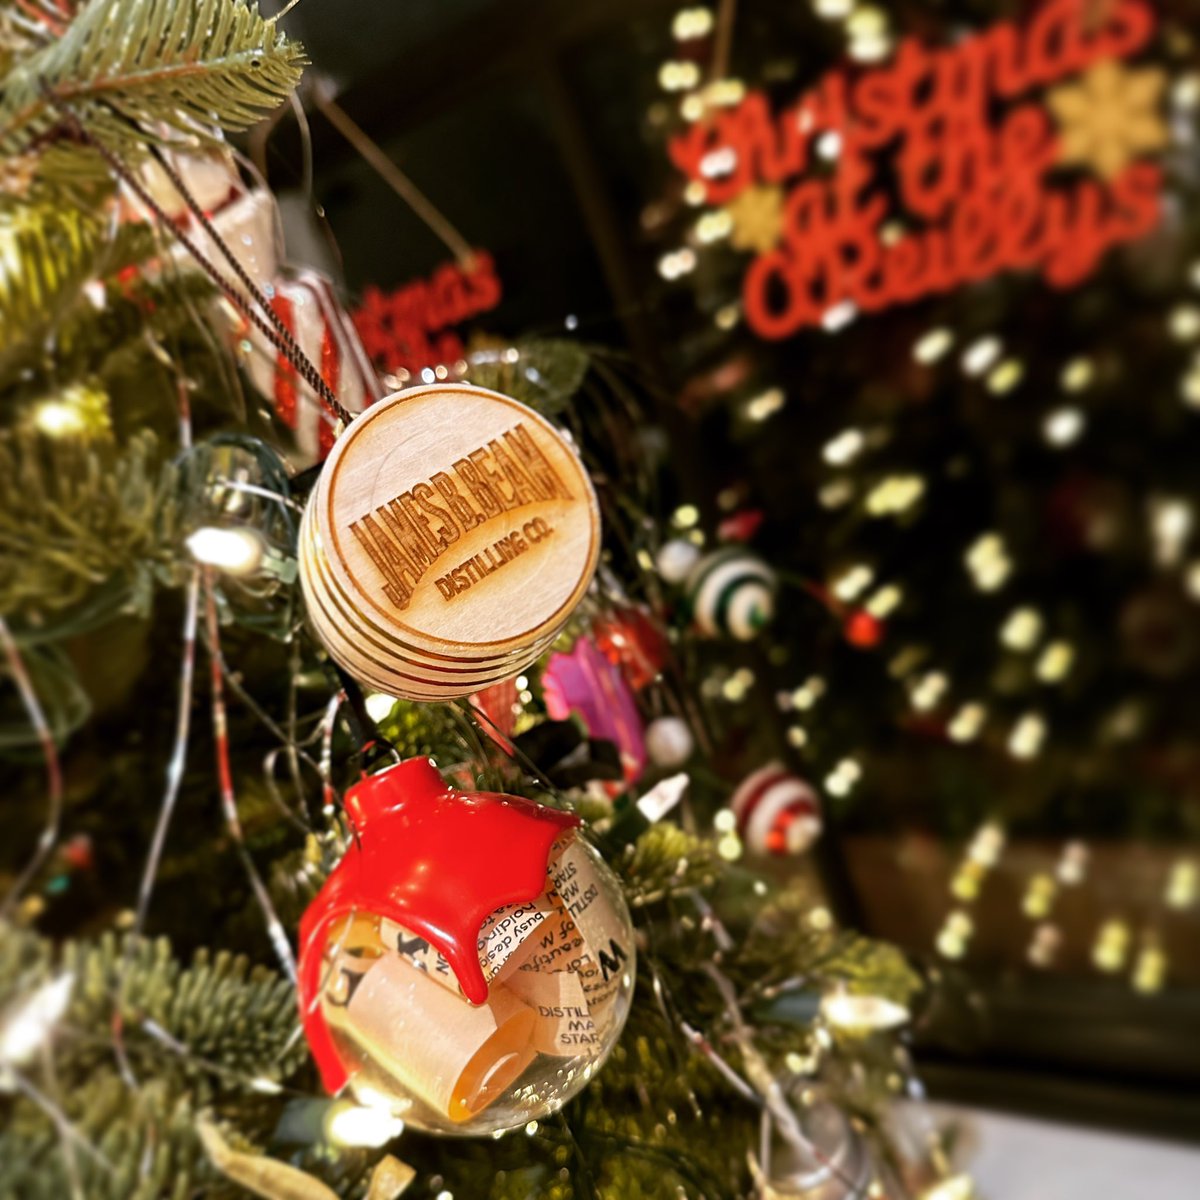 Cannot decide between a classic Maker’s Mark or a small batch bourbon from the James B Beam Distilling Co? Today’s #OrnamentOfTheDay is a bit of both! #PJHXmas